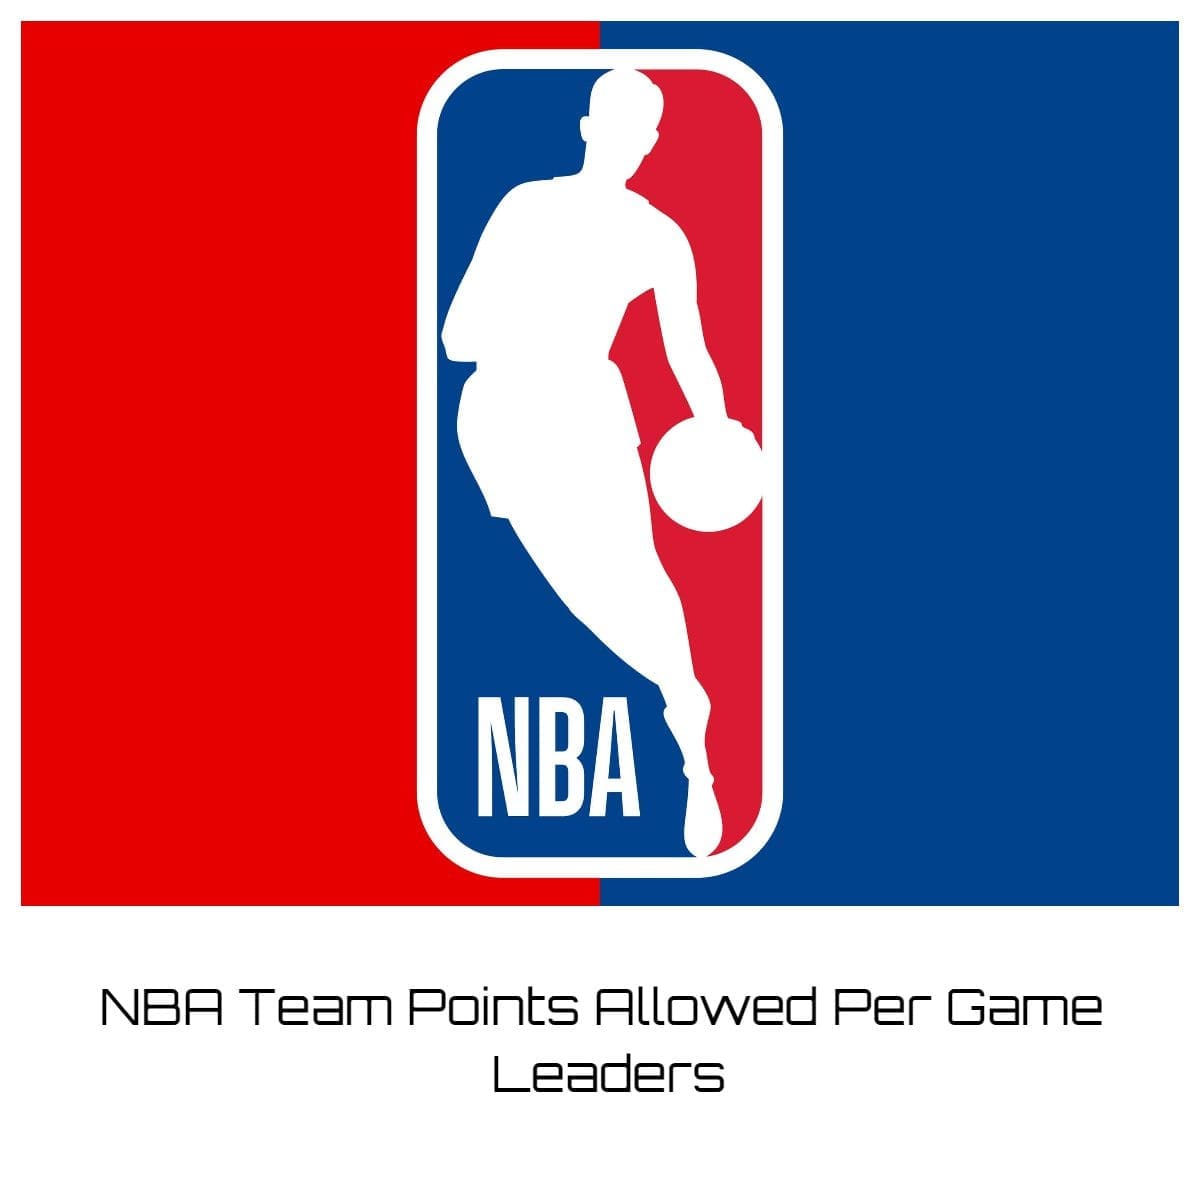 NBA Team Points Allowed Per Game Leaders